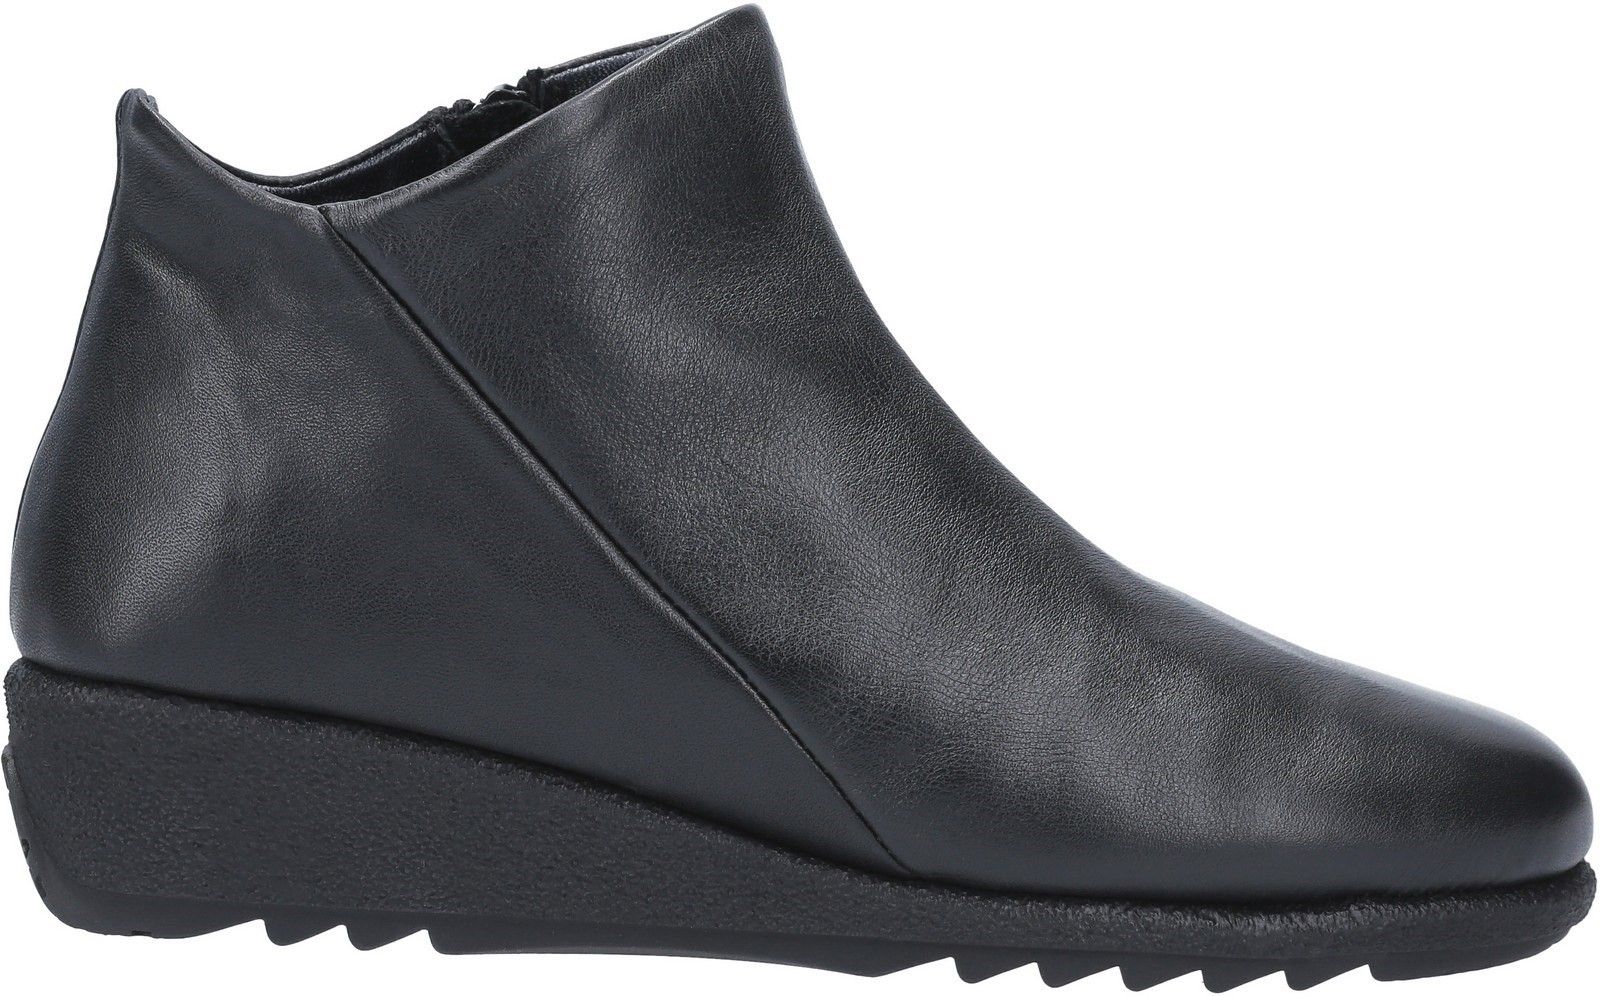 The Loaf Leather Ankle boot from Riva, is a stylish ladies boot with a side zip for easy on and offLeather Upper. 
Side Zip.